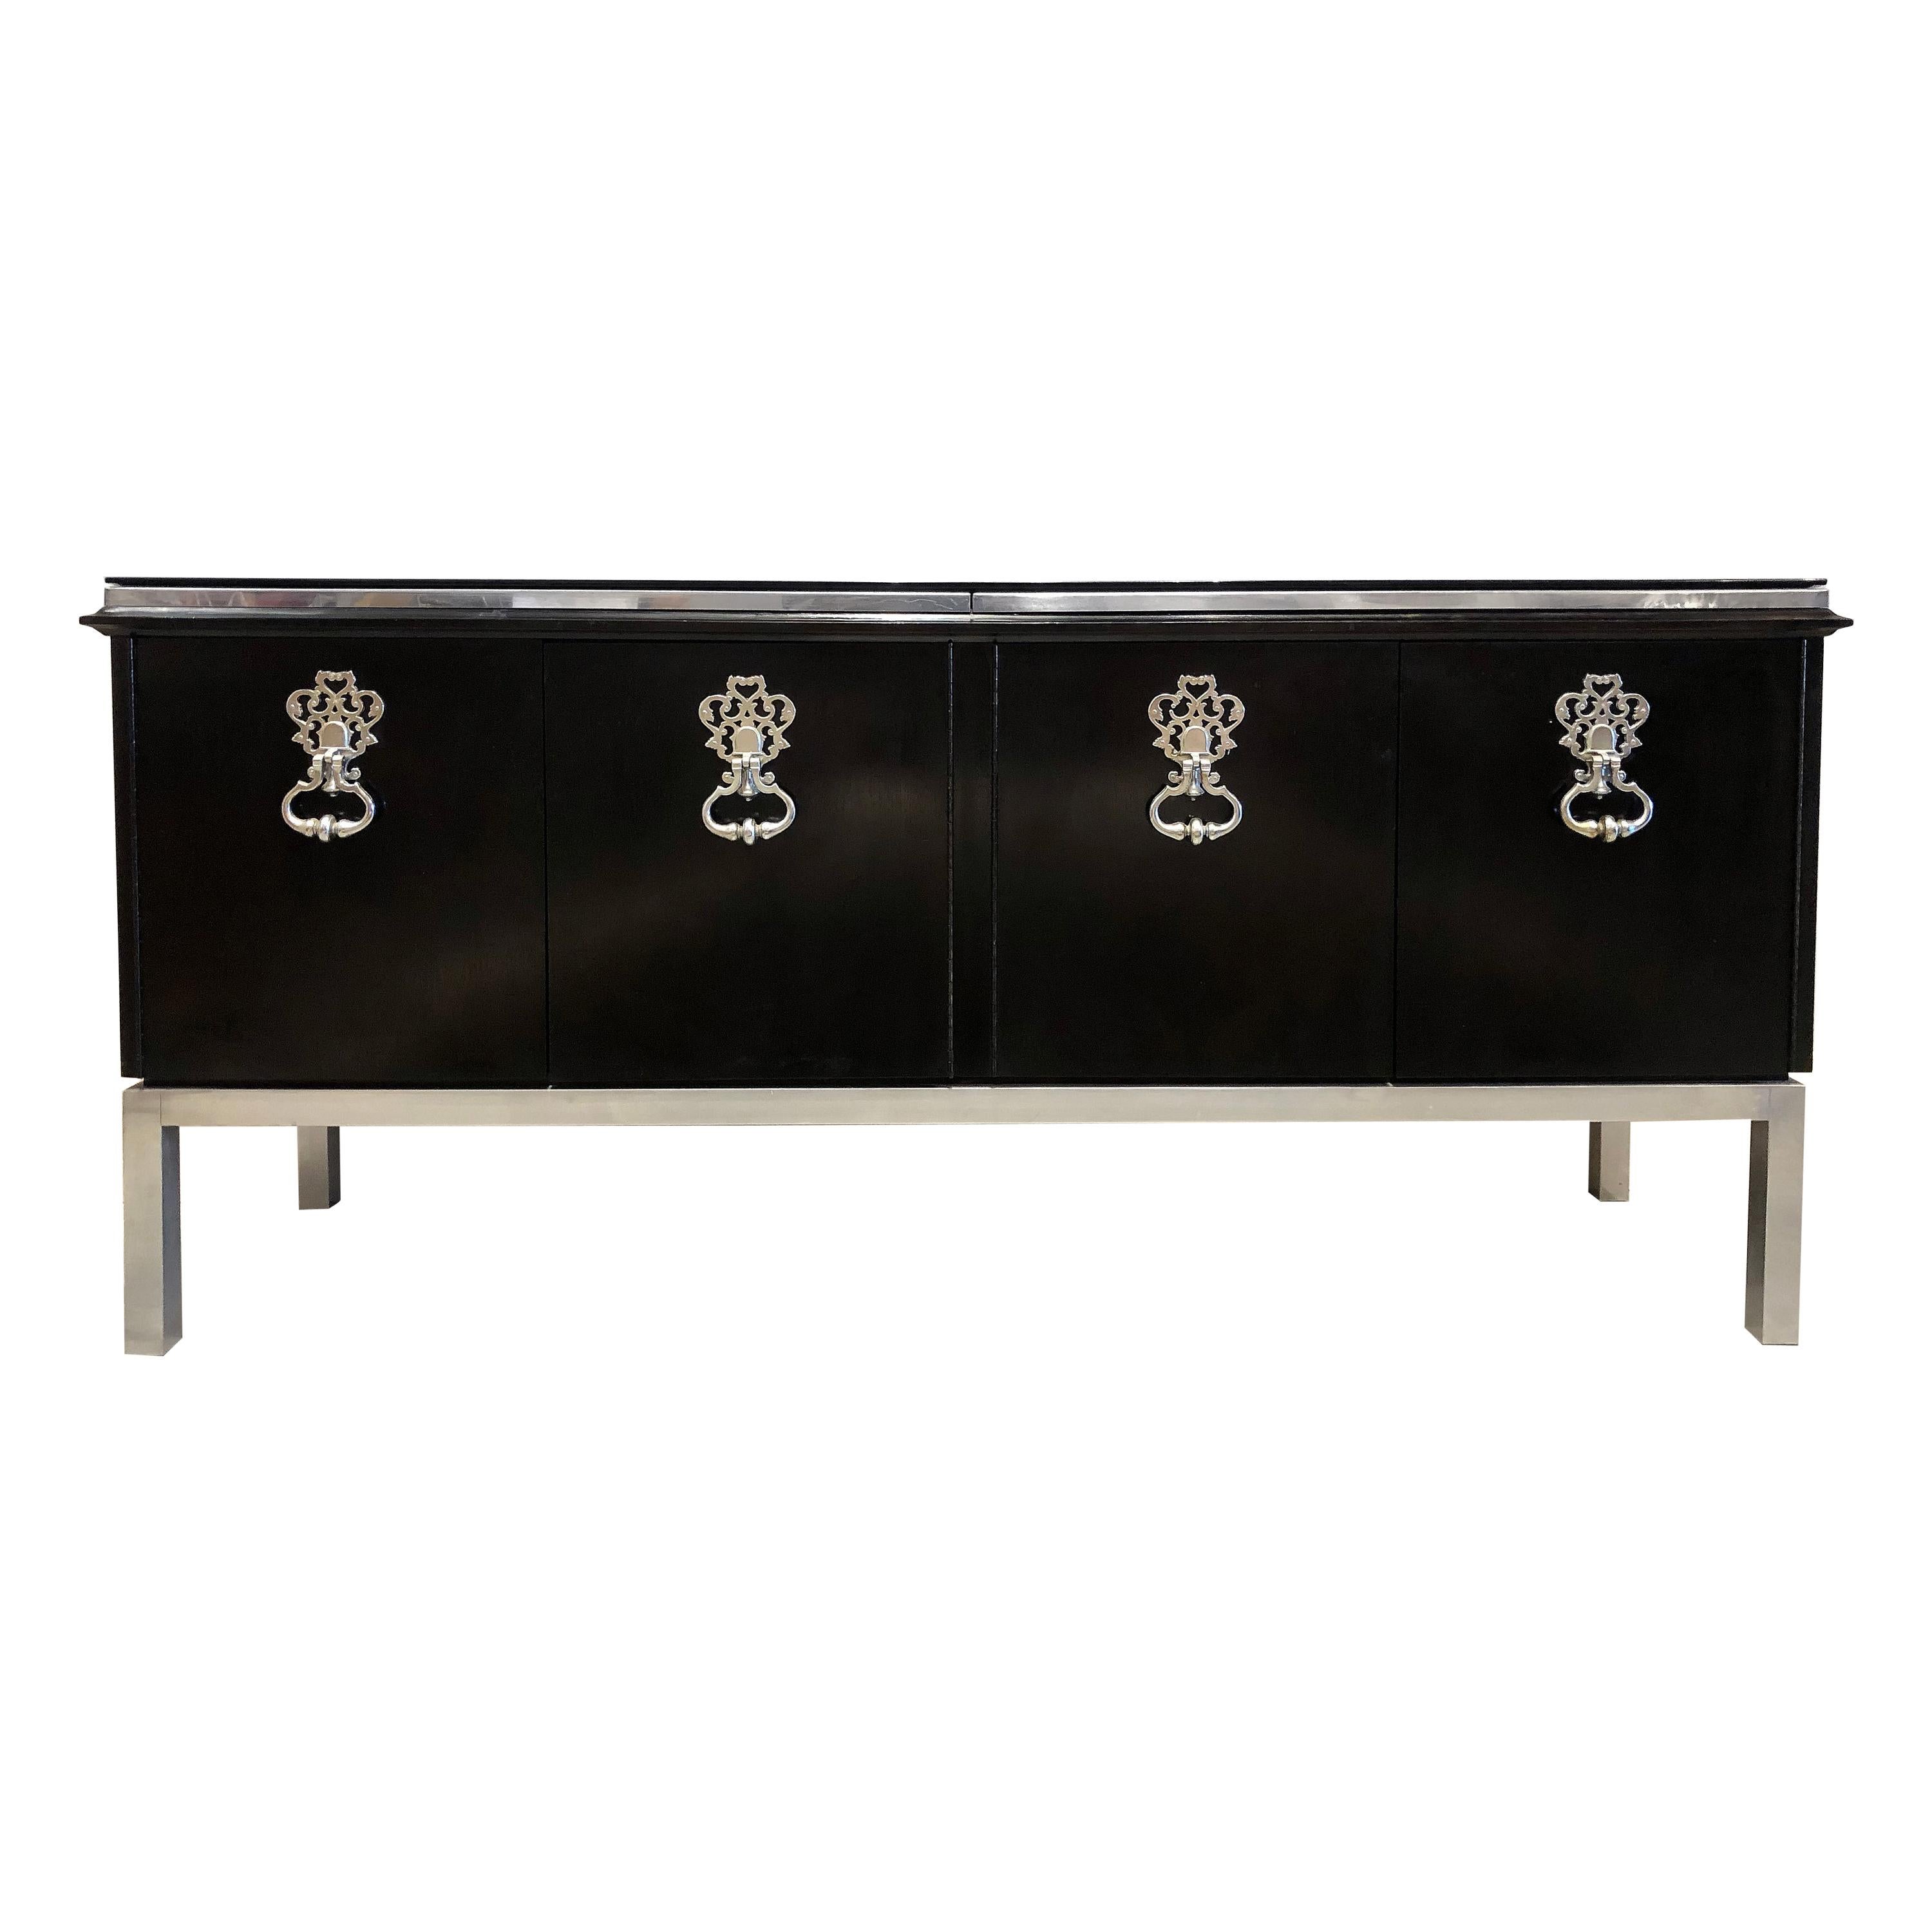 1970s Mastercraft Credenza after Parzinger with Black Glass Top